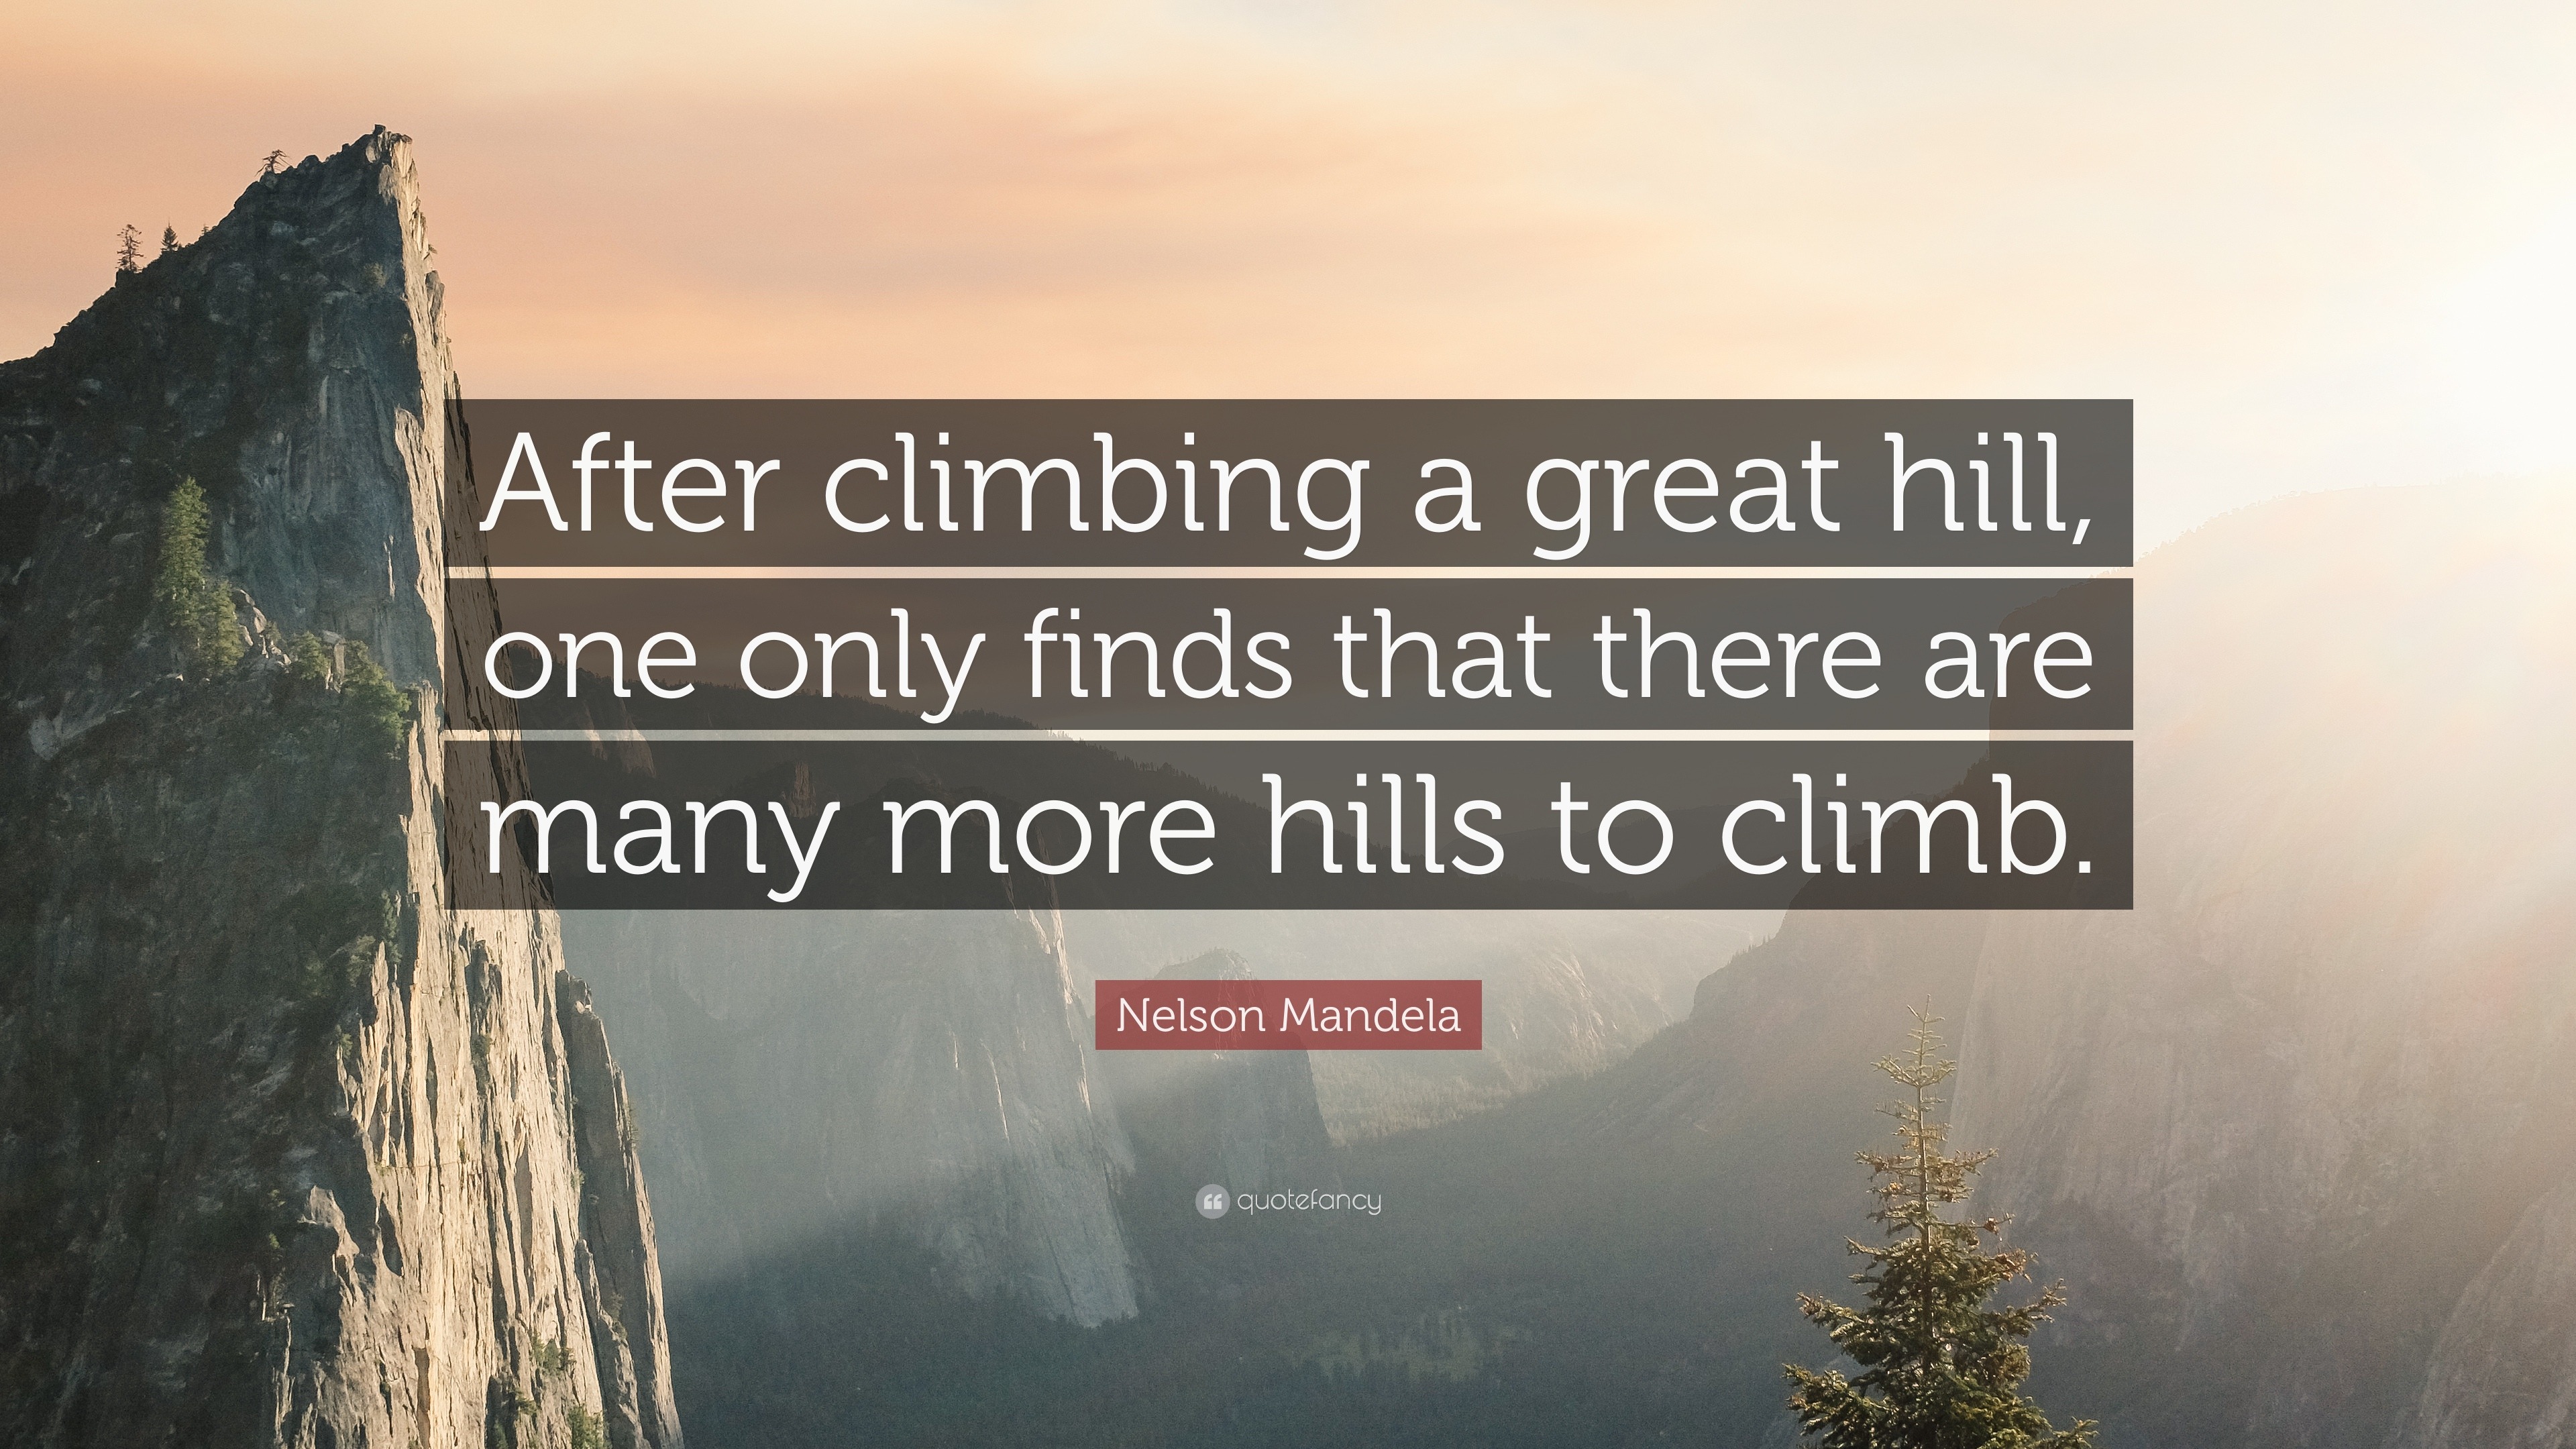 Nelson Mandela Quote: “After climbing a great hill, one only finds that